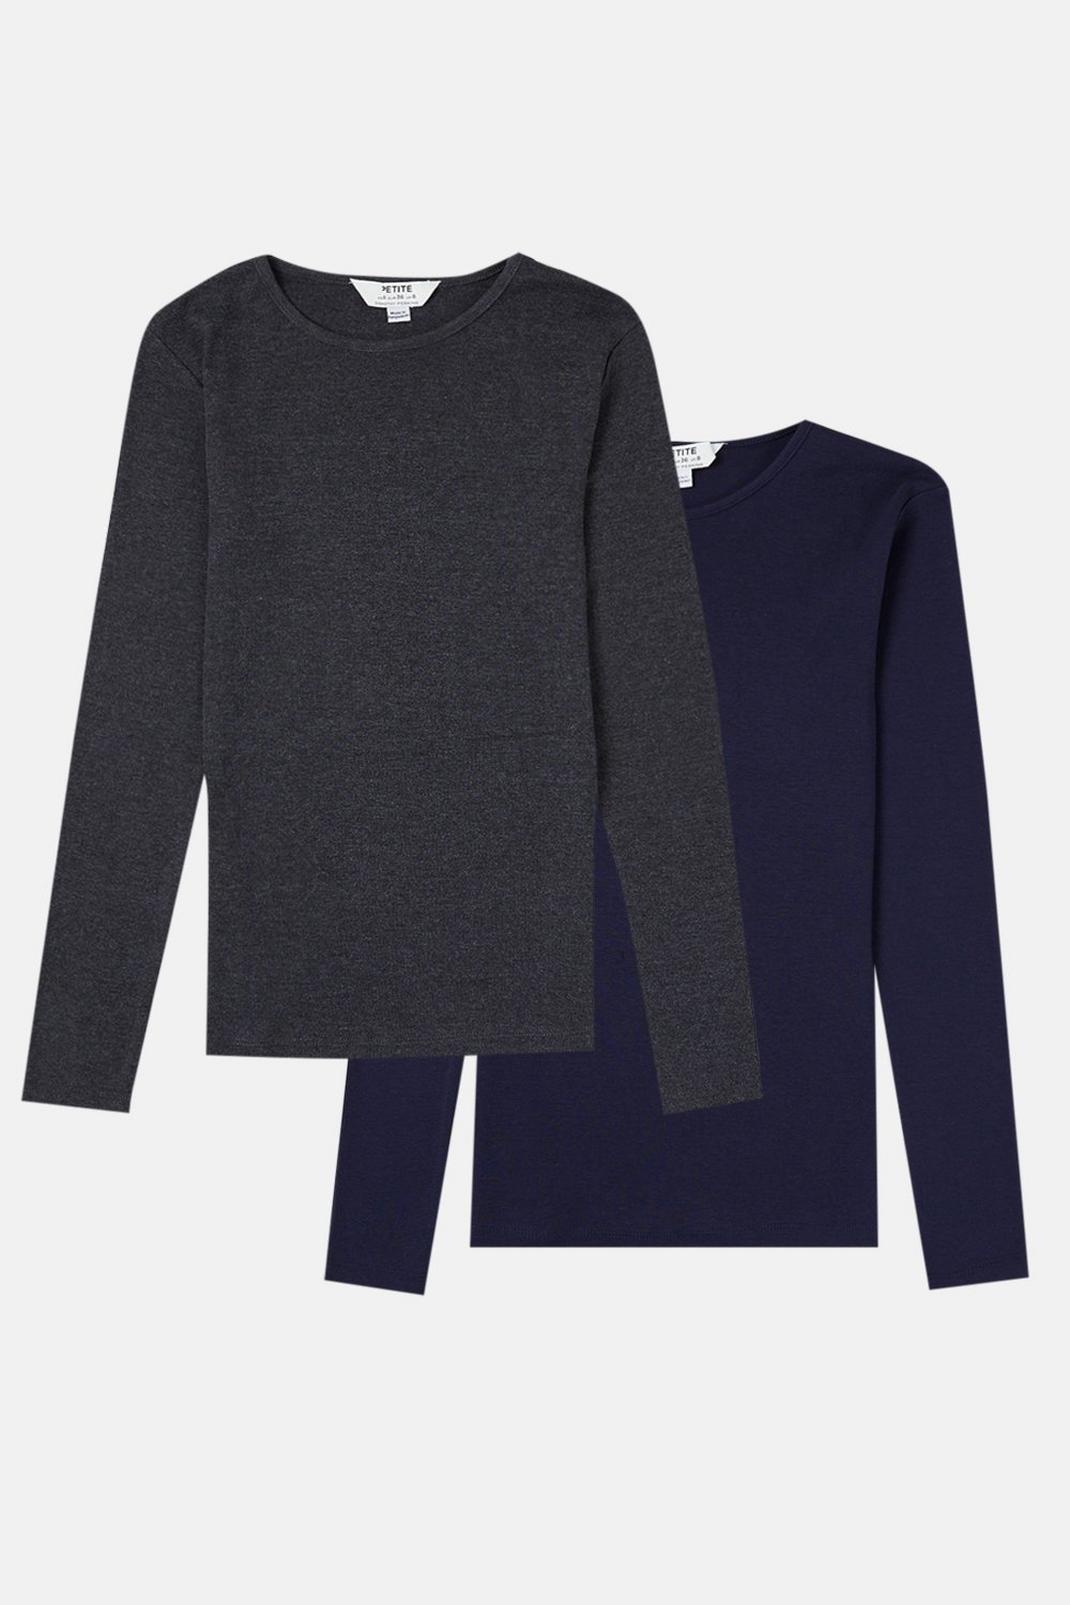 Multi Petite 2pack Navy And Grey Long Sleeve Top image number 1